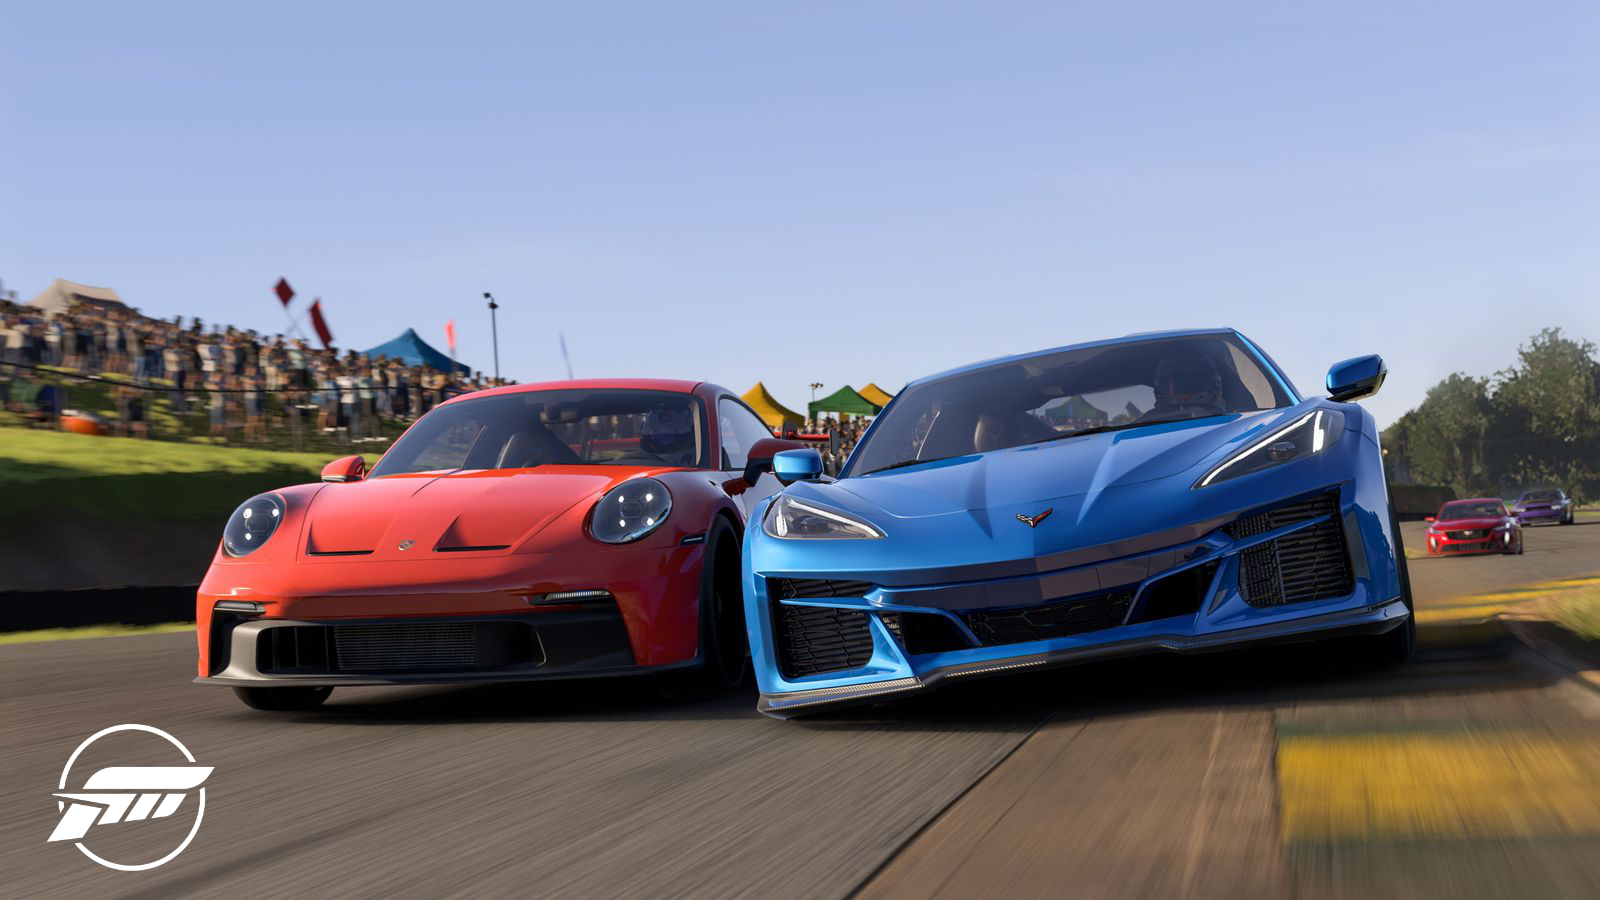 Marketing screenshot from Forza Motorsport depicting a corvette and a porsche neck and neck in a race.